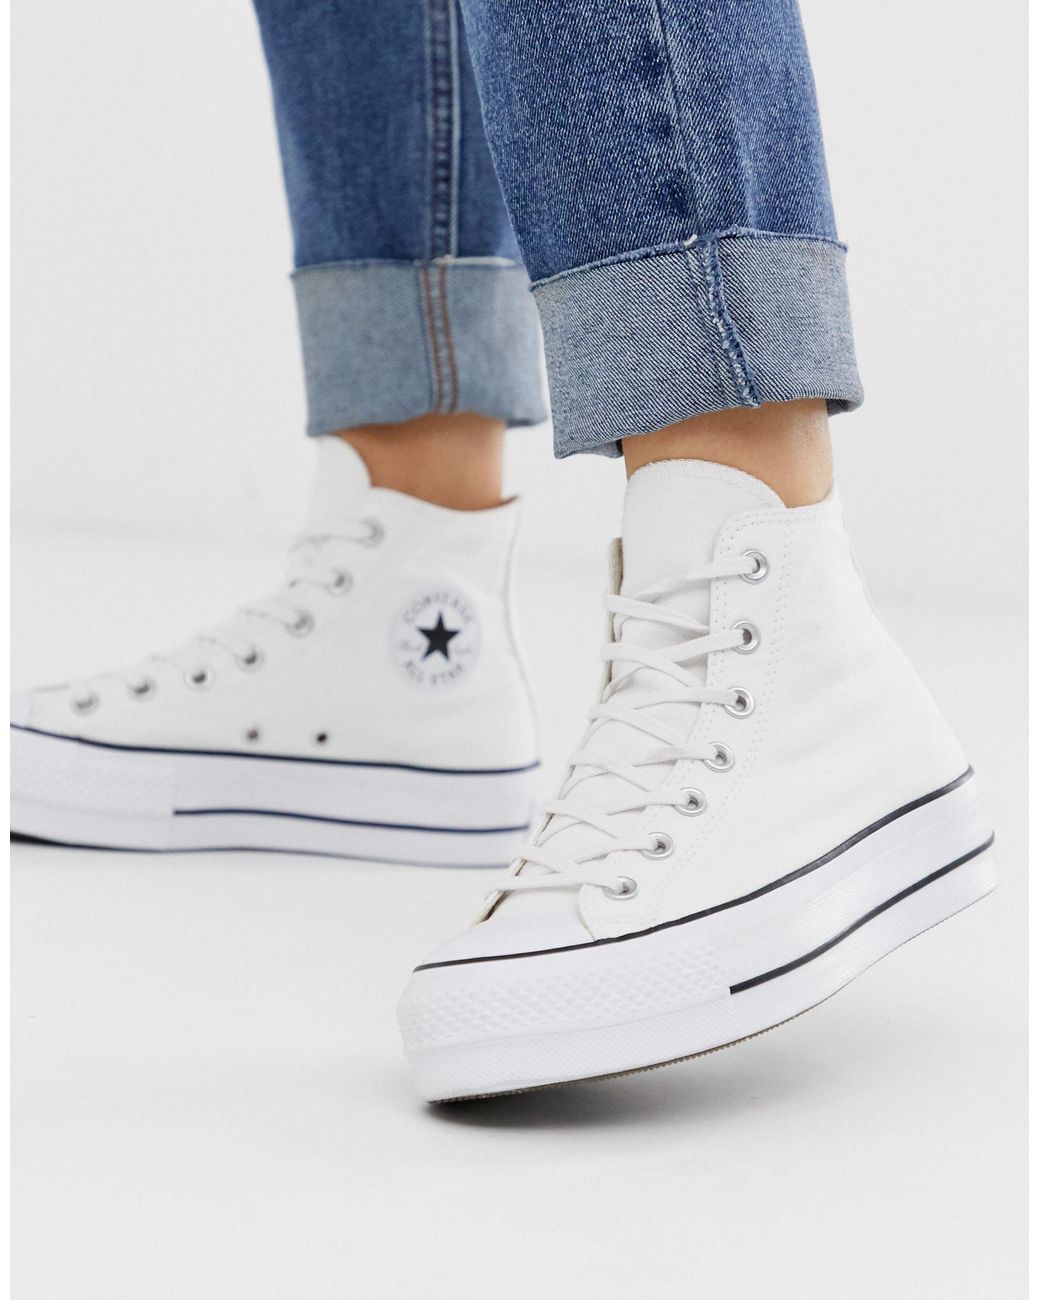 Converse Chuck Taylor All Star Hi Lift Sneakers in White | Lyst